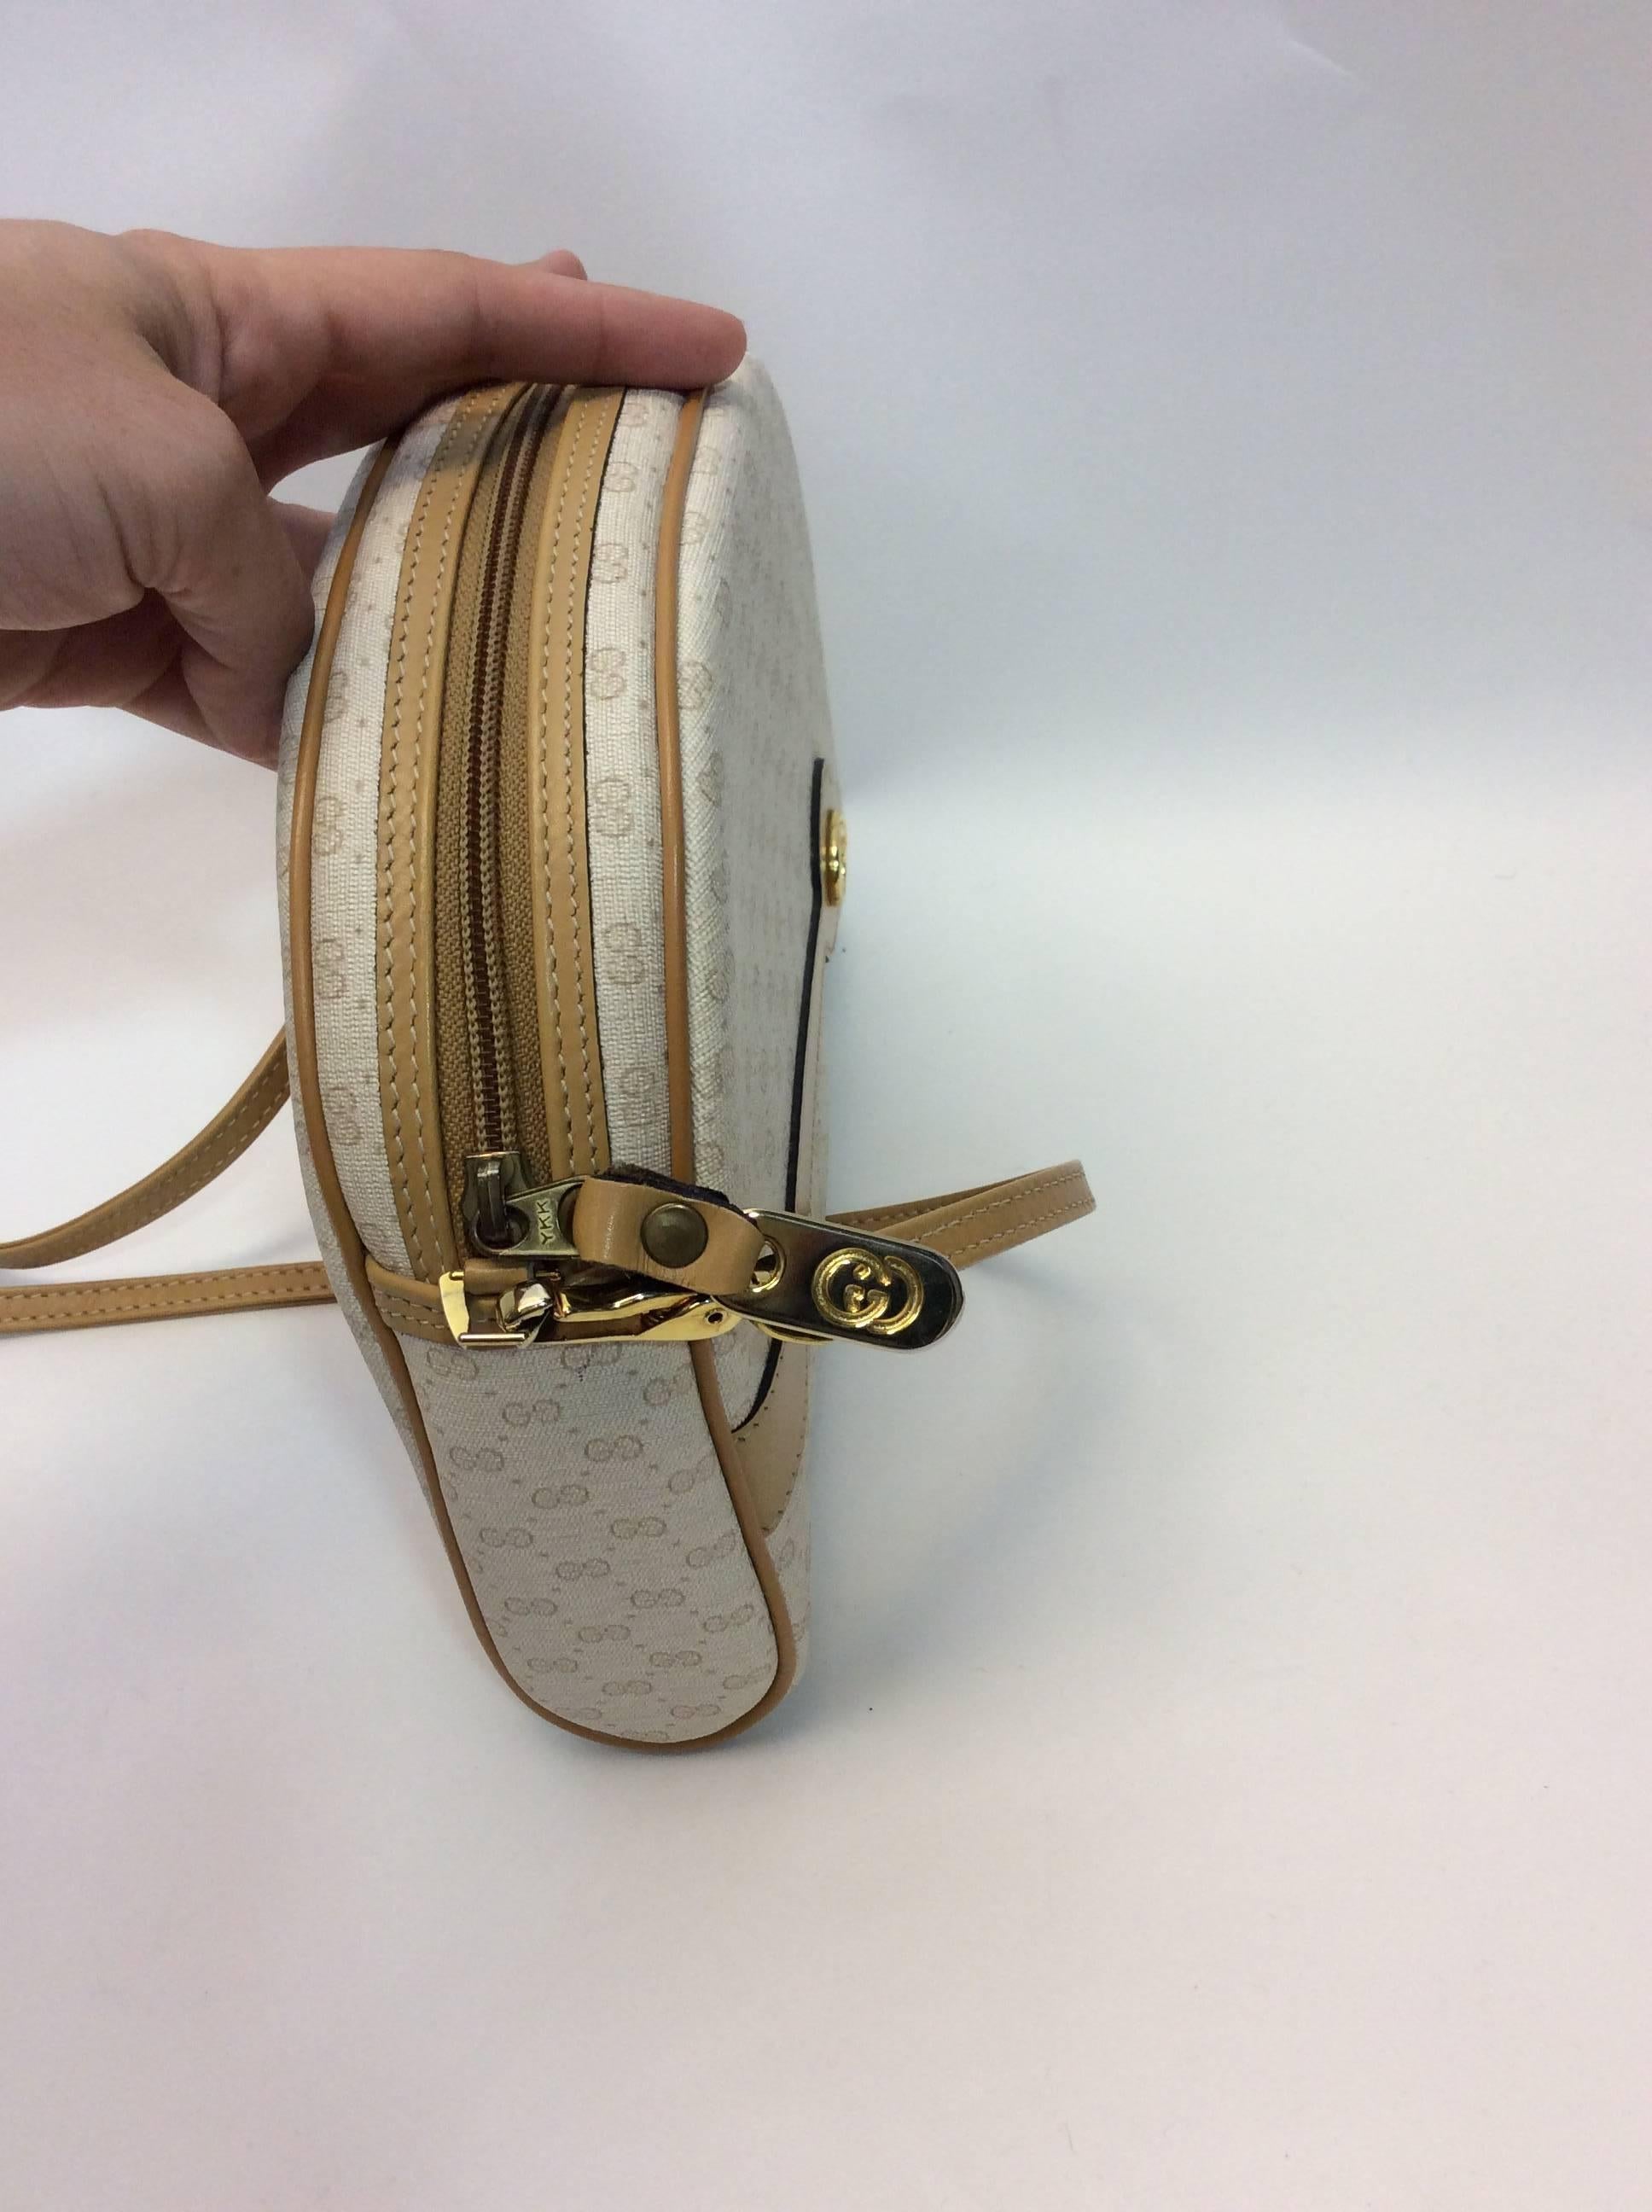 Gucci Vintage Crossbody Bag
Top zip around style
Cream logo print
Tan leather trim
$225
Made in Italy